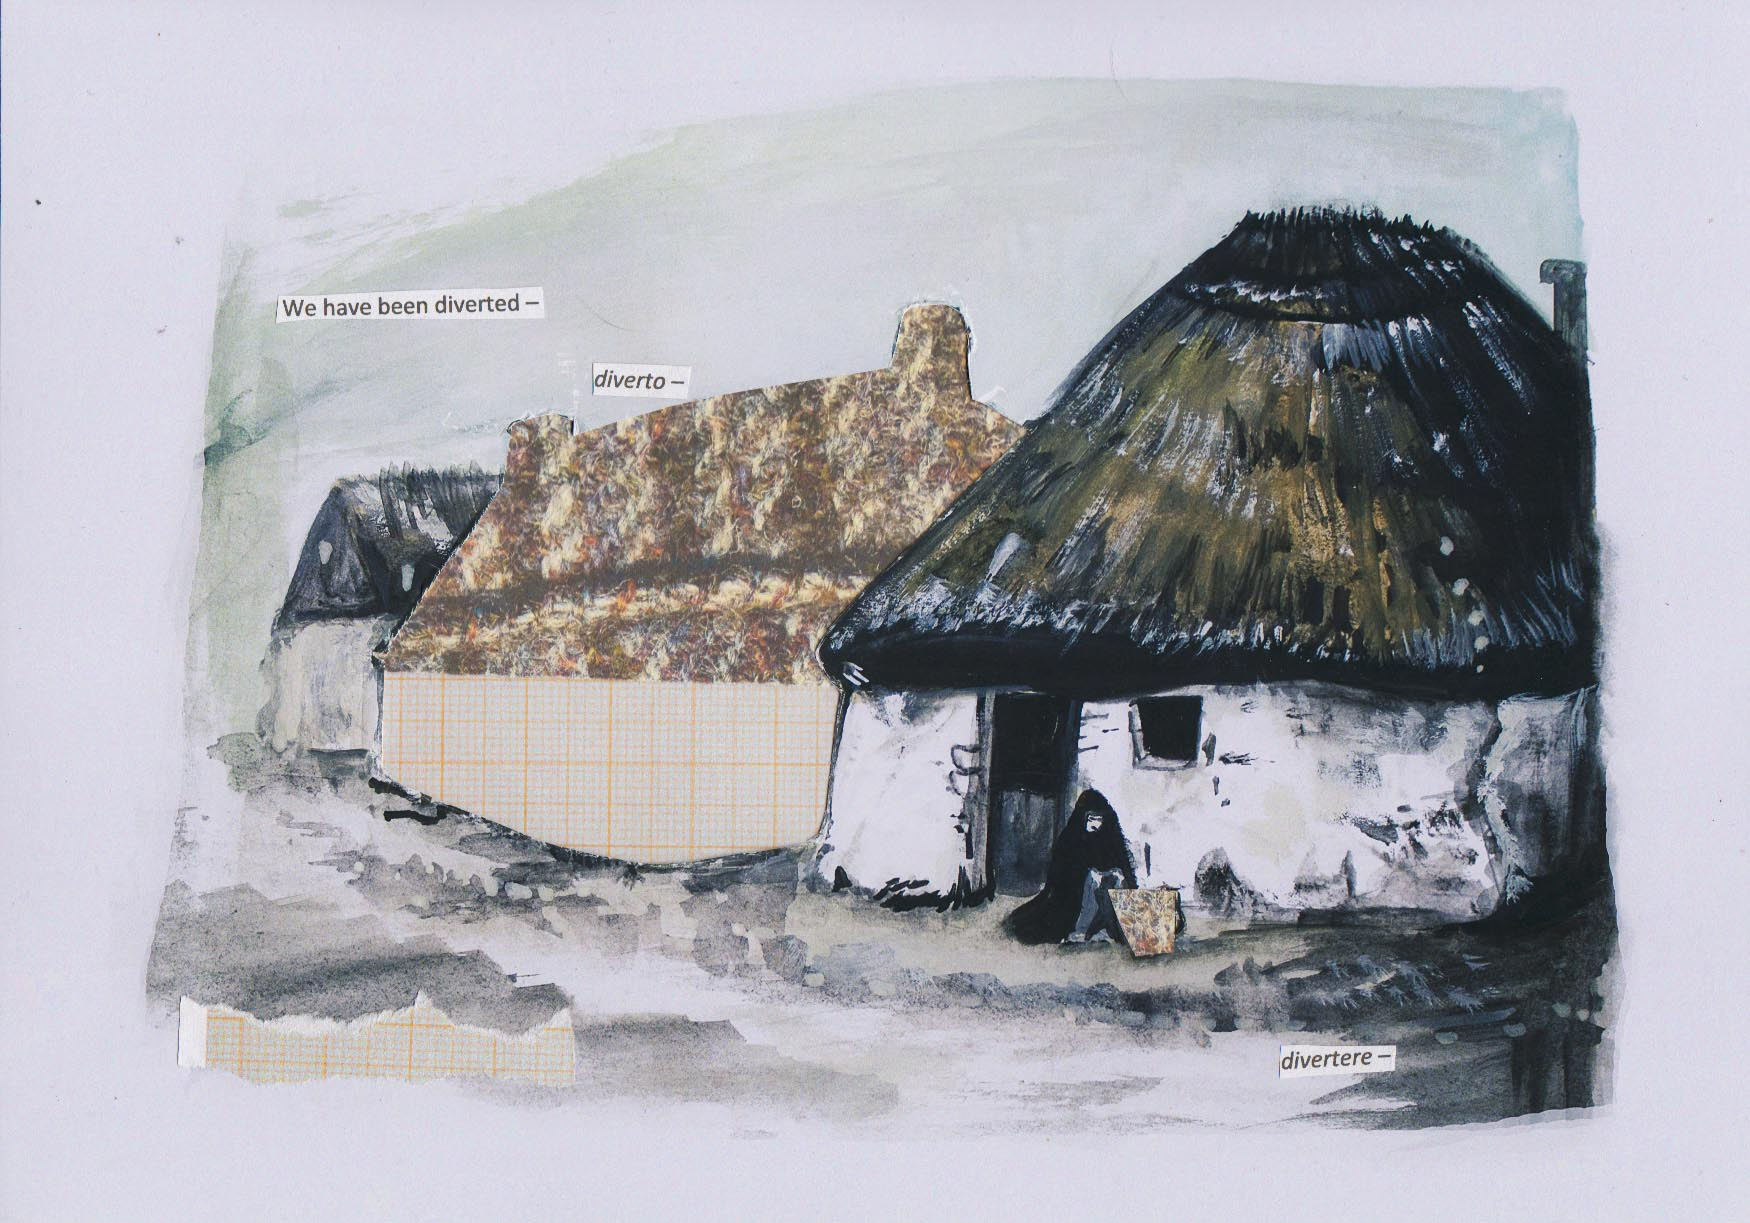 A collaged painting of Galway cottages with a woman shrouded in black sat in front of one of them, with the text "we have been diverted - diverto - divertere", a quote from a Brian Friel play, Translations